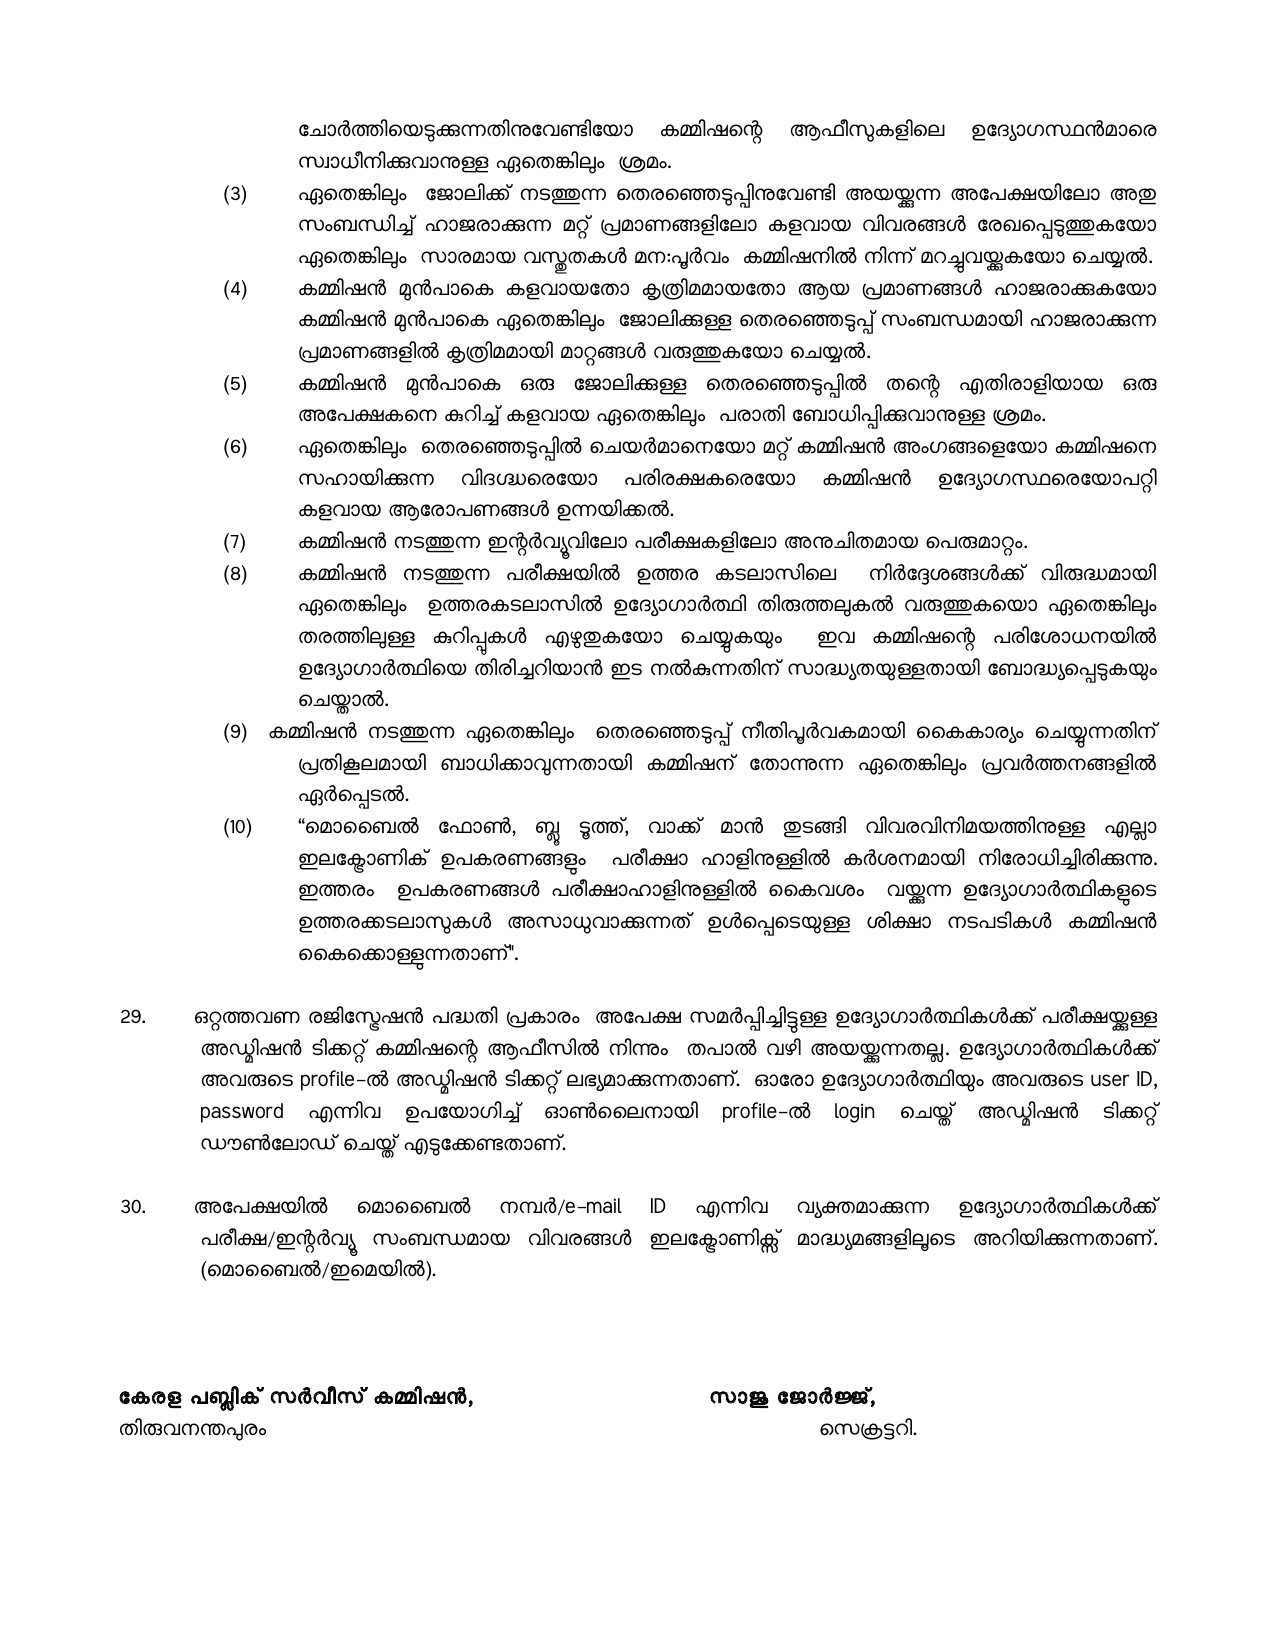 General Conditions and Certificate Formats in Malayalam - Notification Image 26